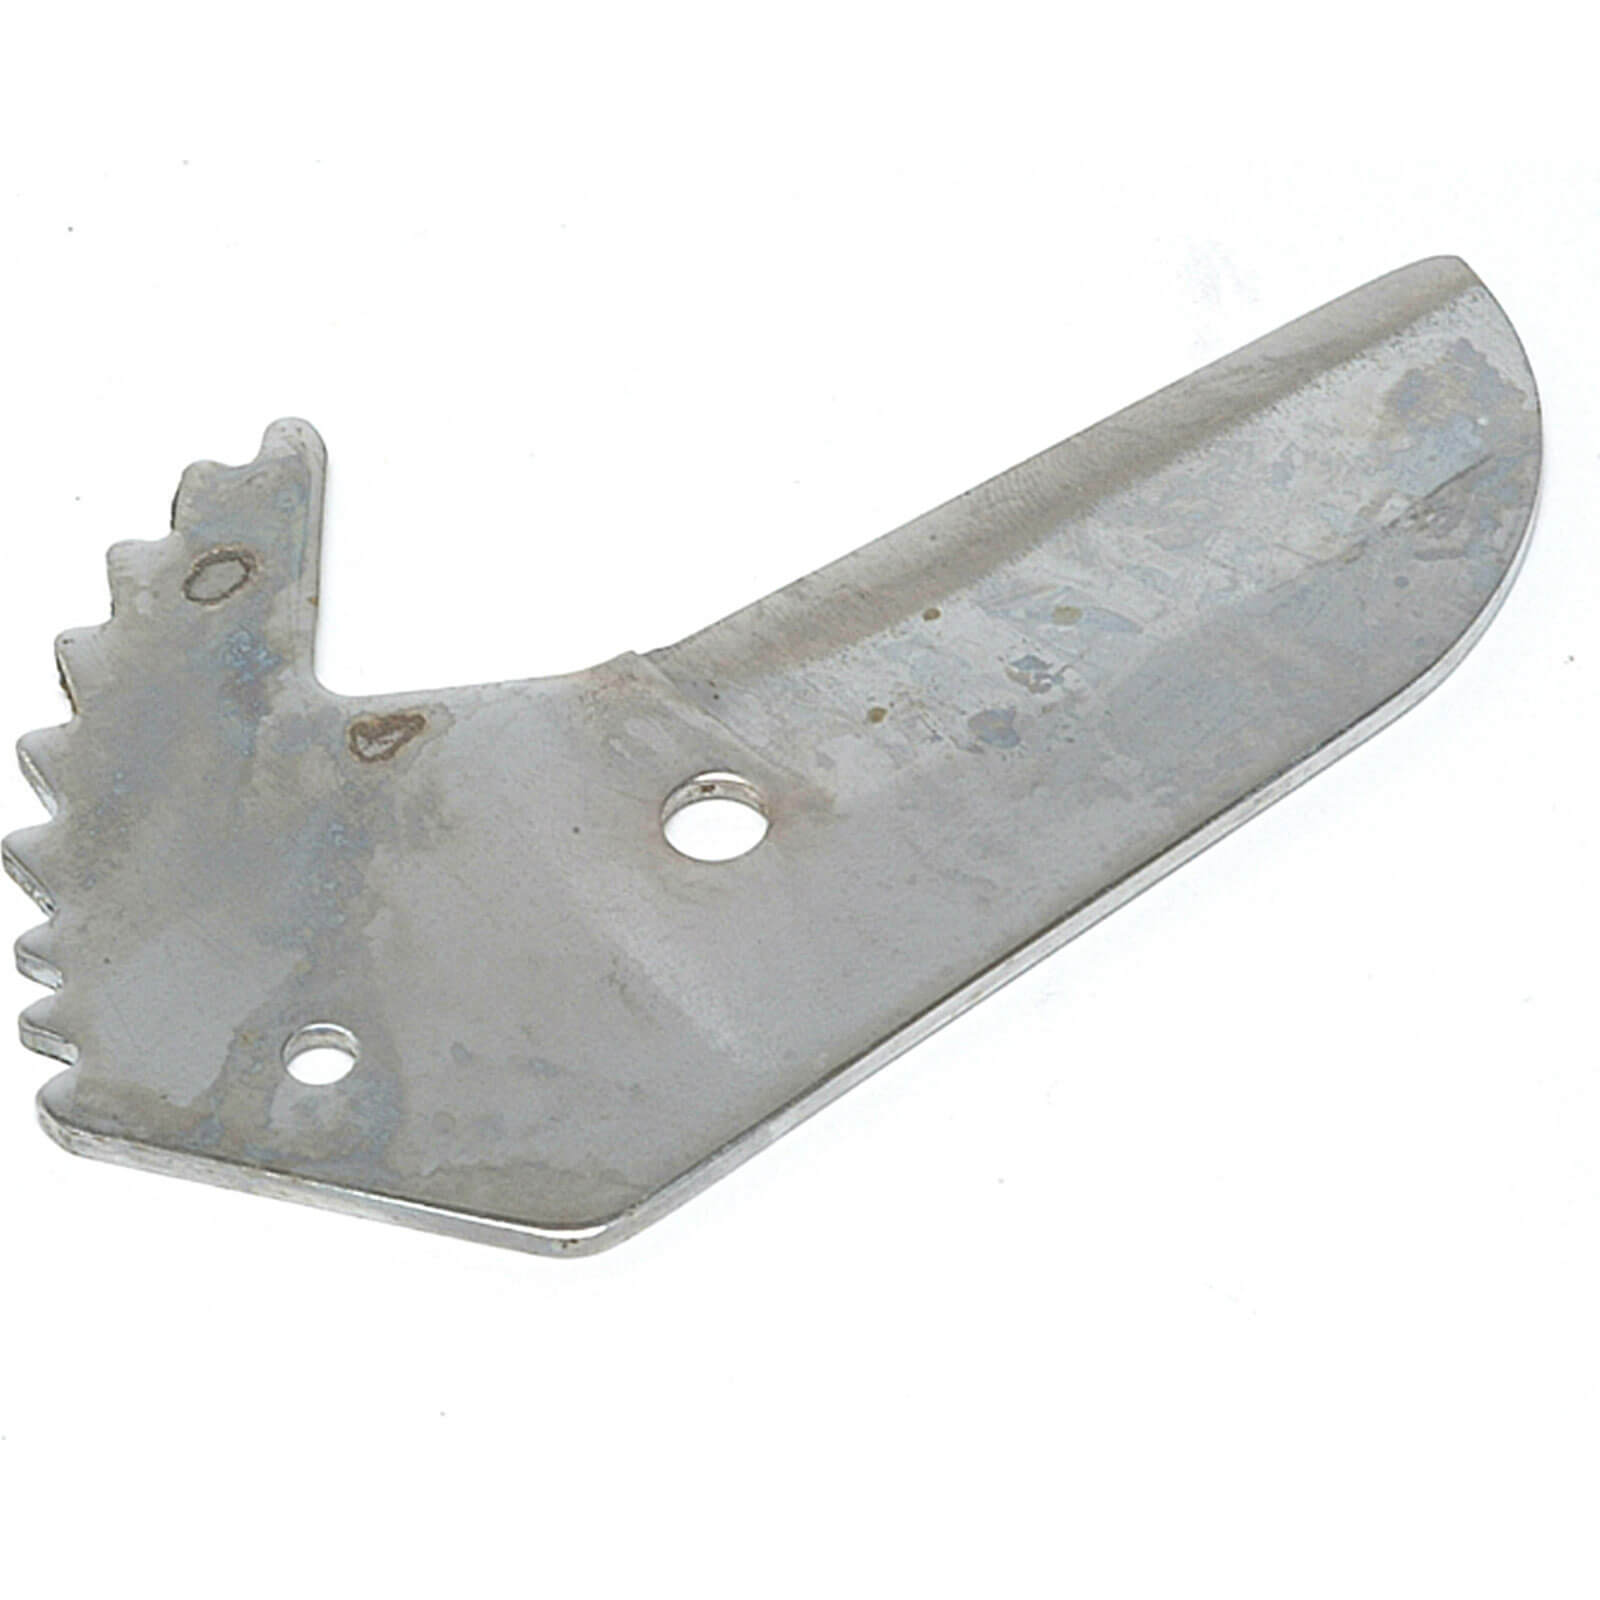 Faithfull Plastic Pipe Cutter Spare Blade Only